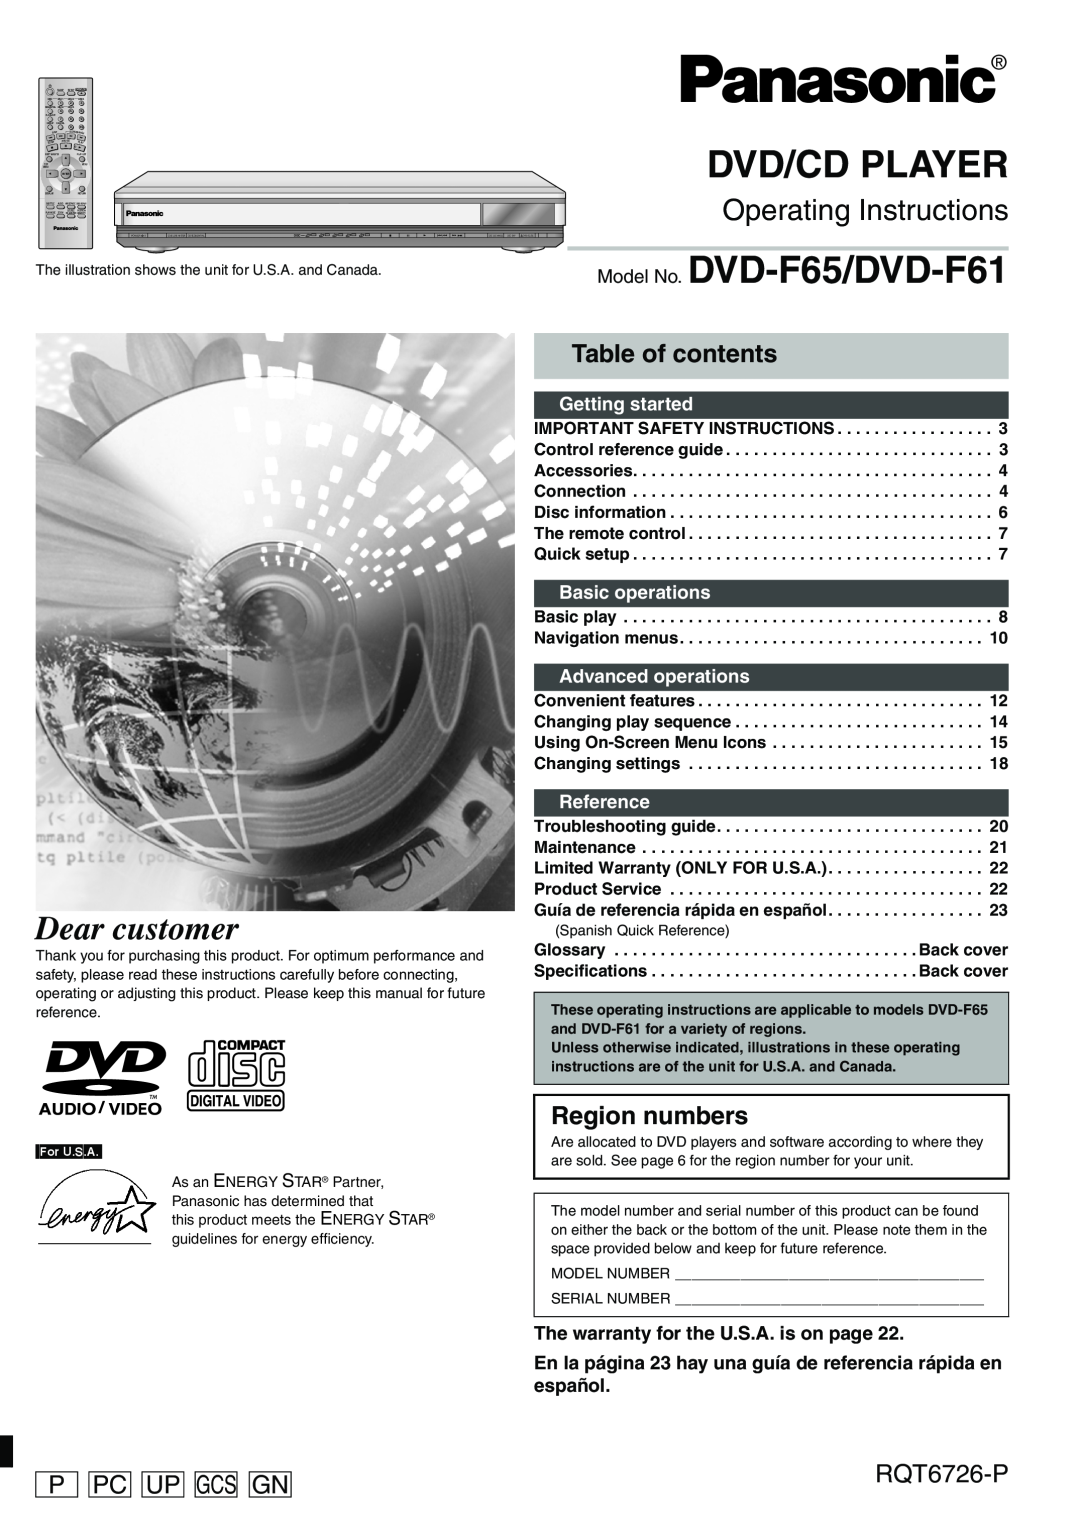 Panasonic DVD-F61 important safety instructions Table of contents, Region numbers, Pc Up Gcsgn, RQT6726-P, Preliminary 